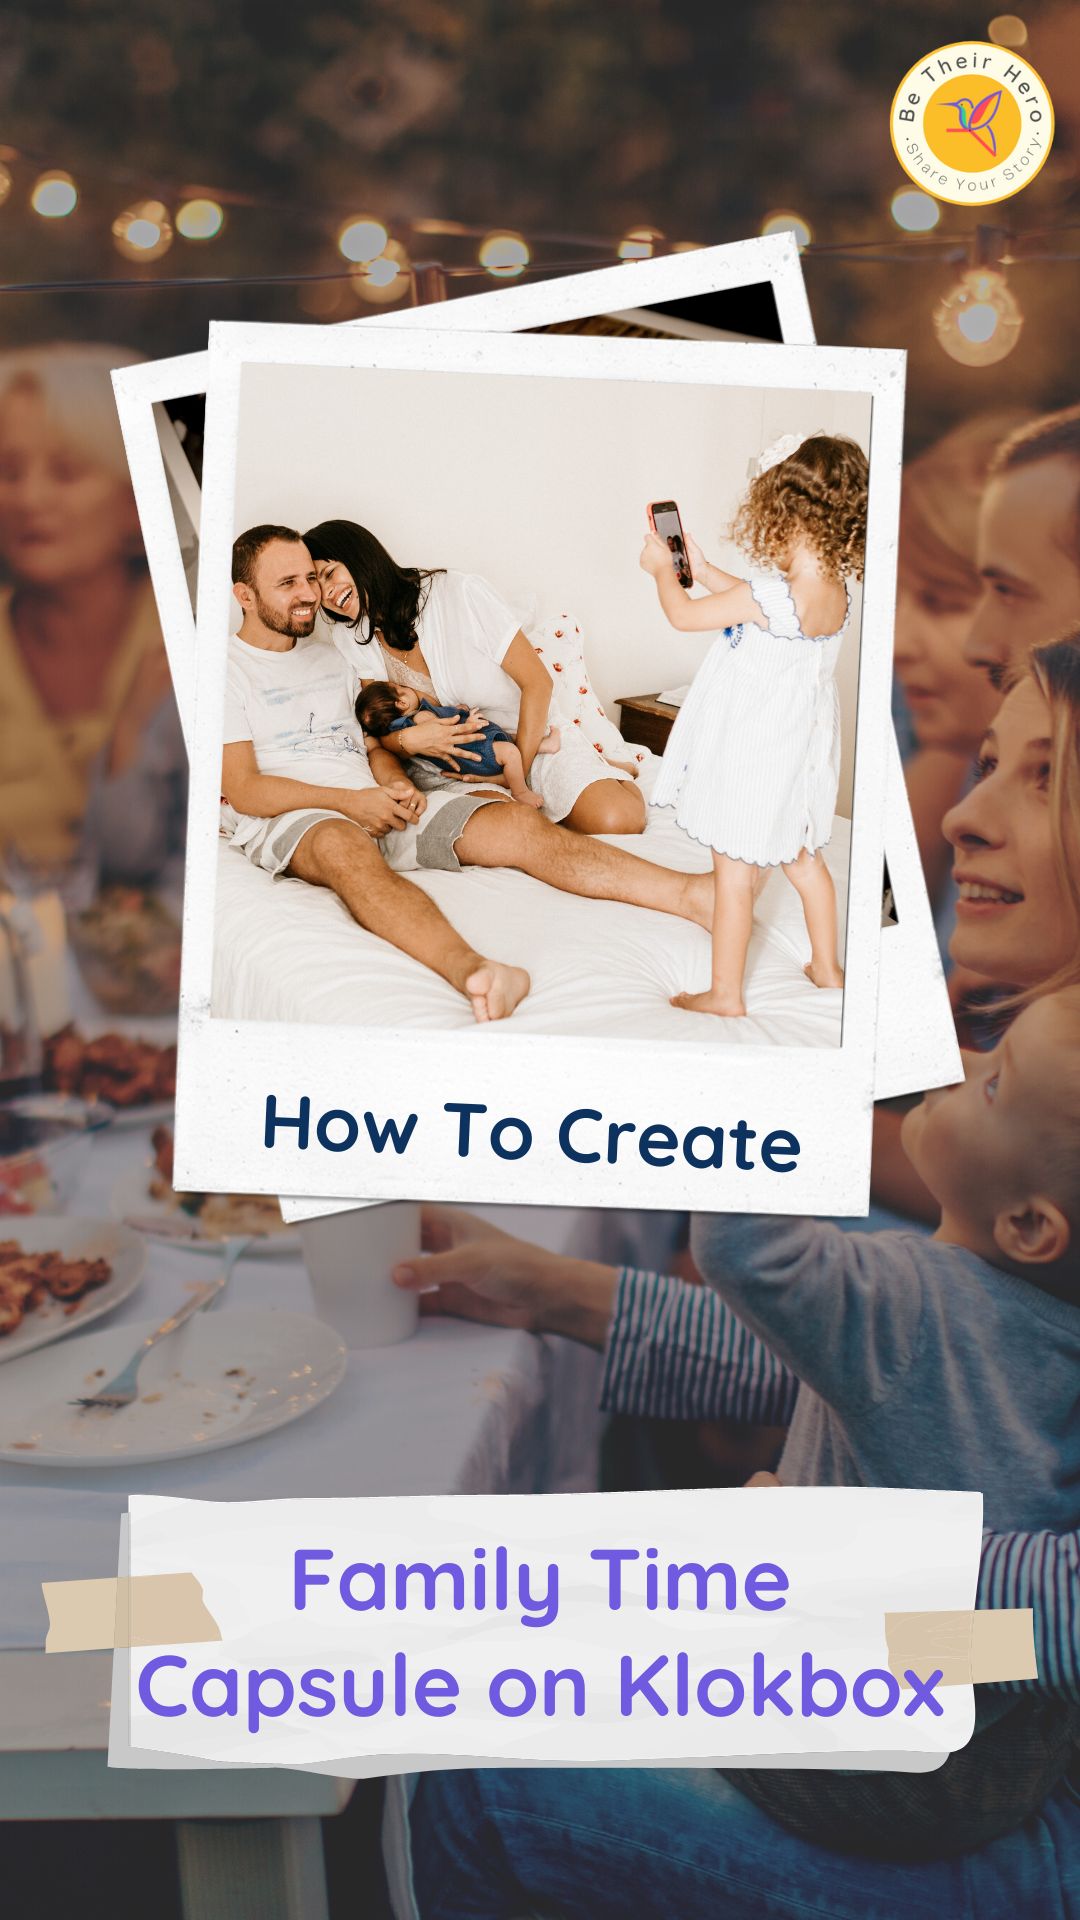 How To Create A Family Time Capsule on Klokbox